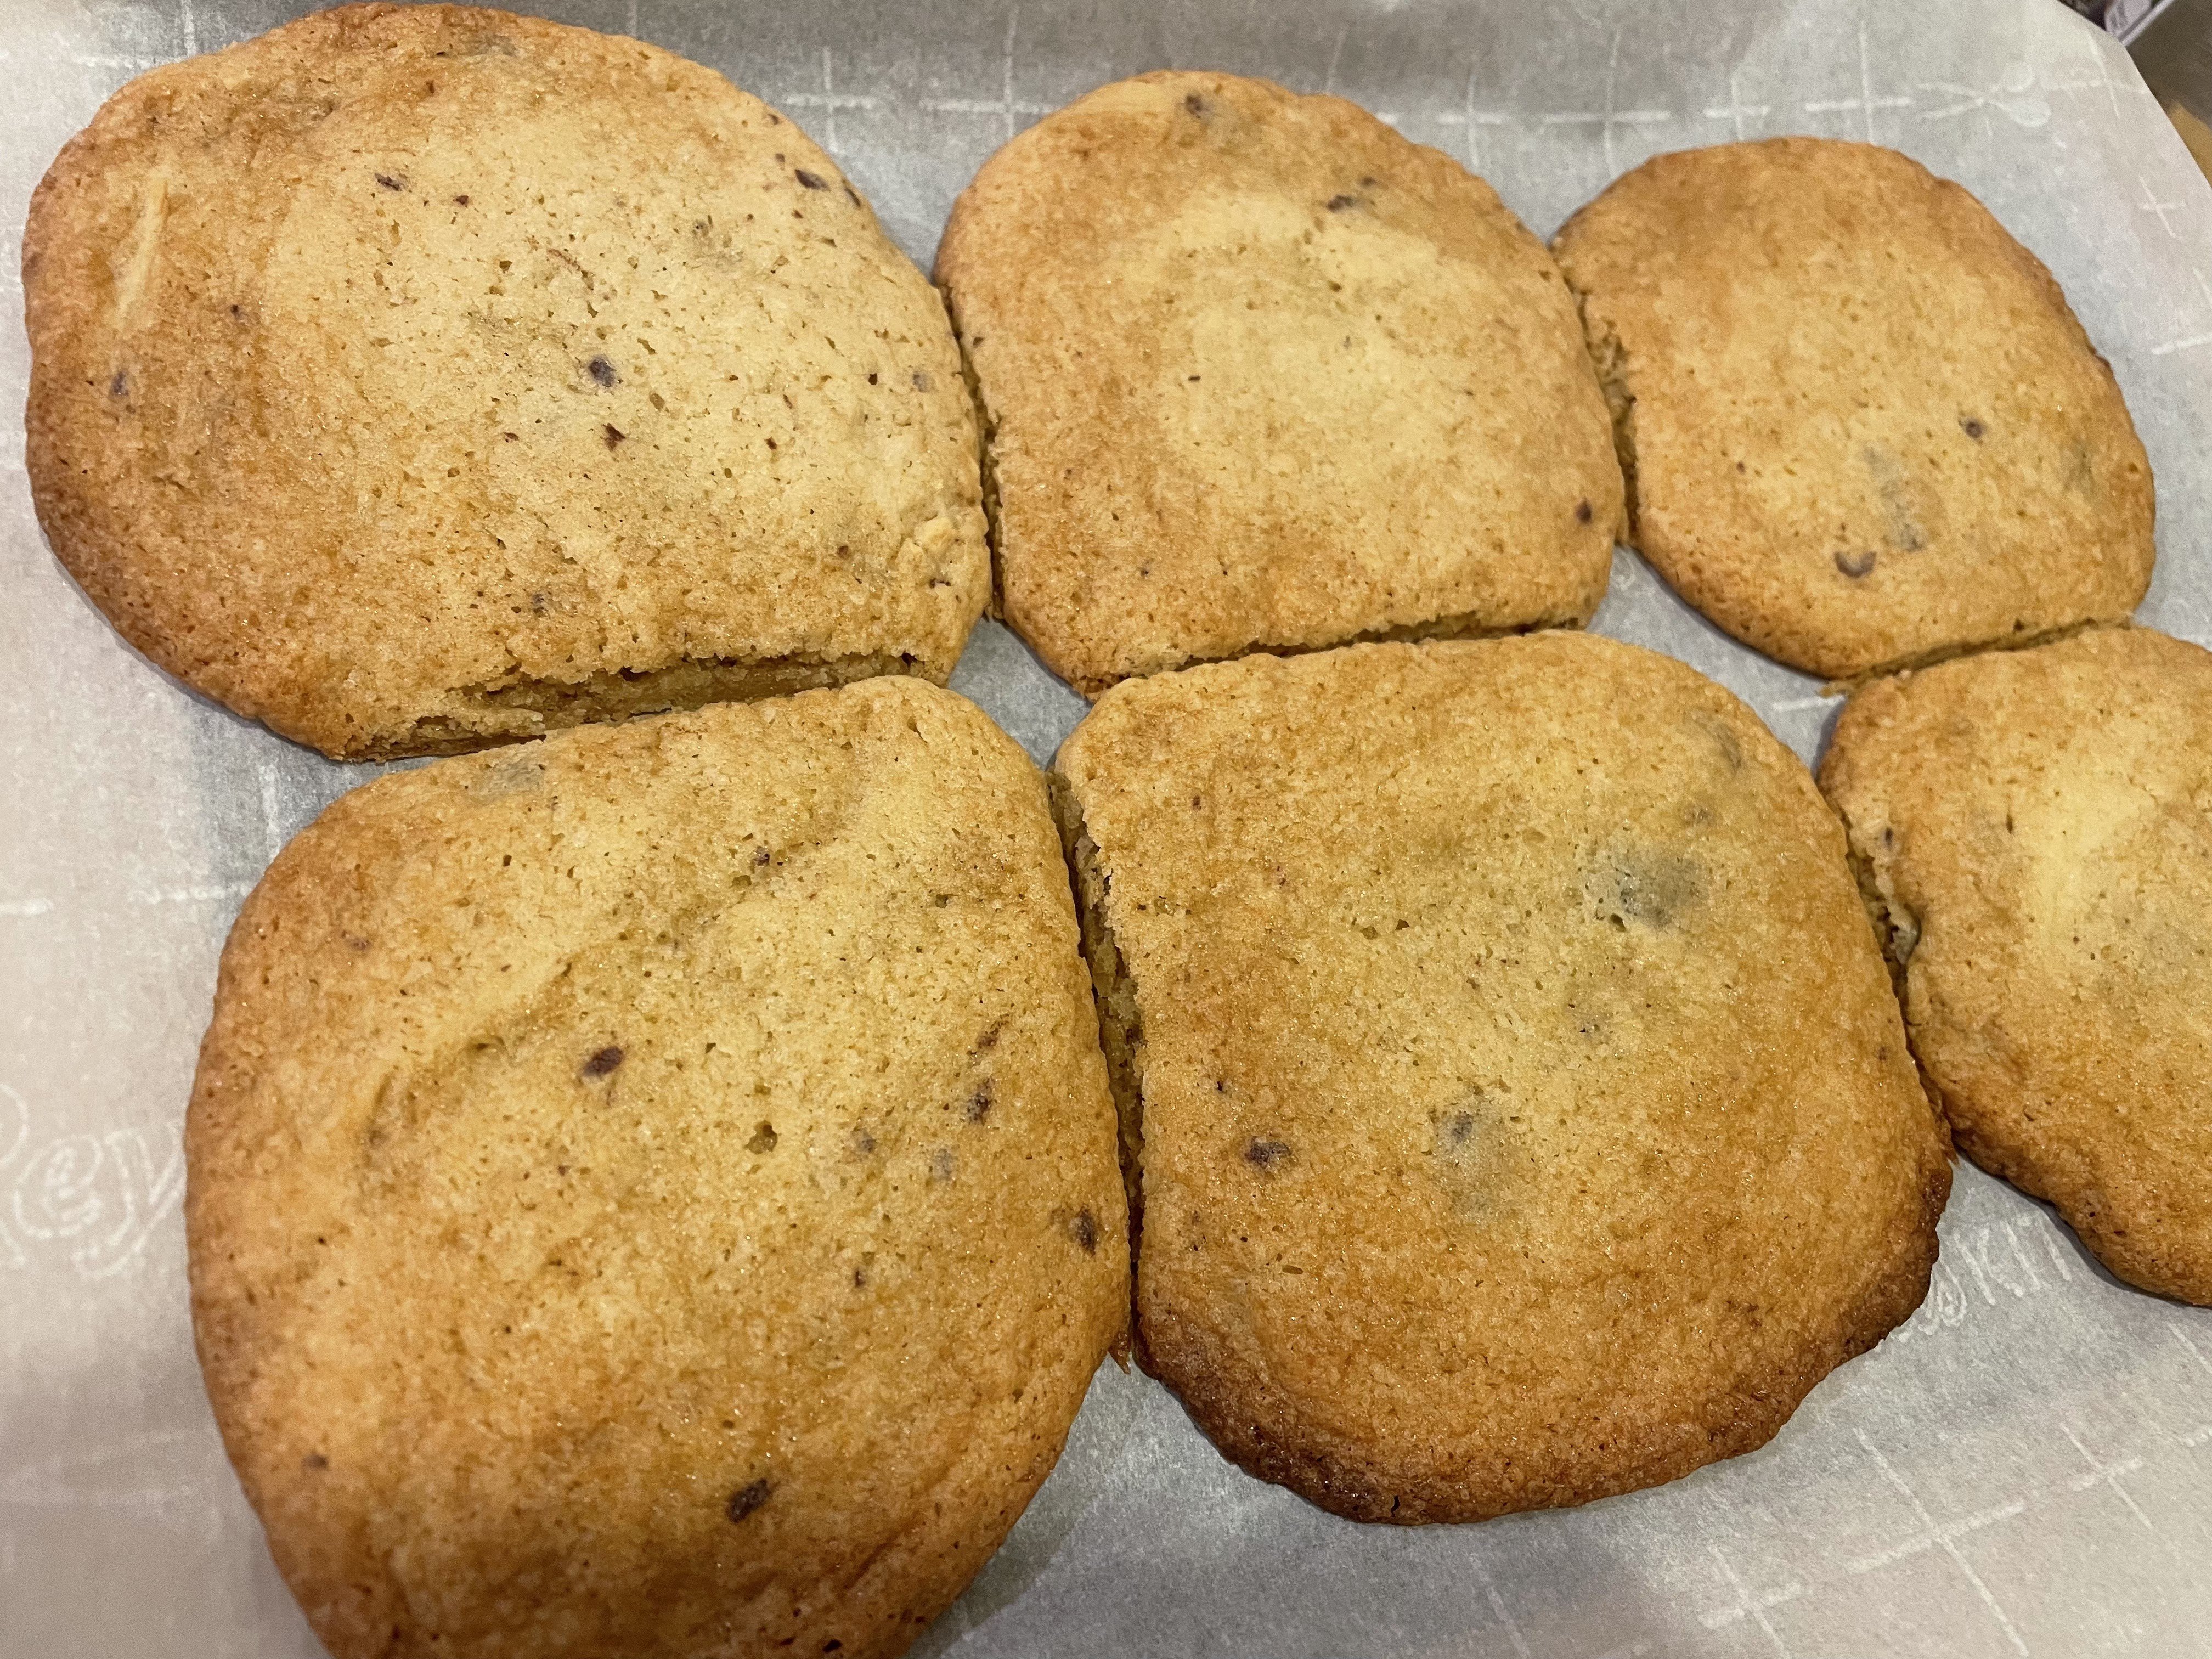 Half-dozen (six) of home baked chocolate chip cookies. Cut to separate just out of oven gives them a squared-off look at their point of contact with each other.